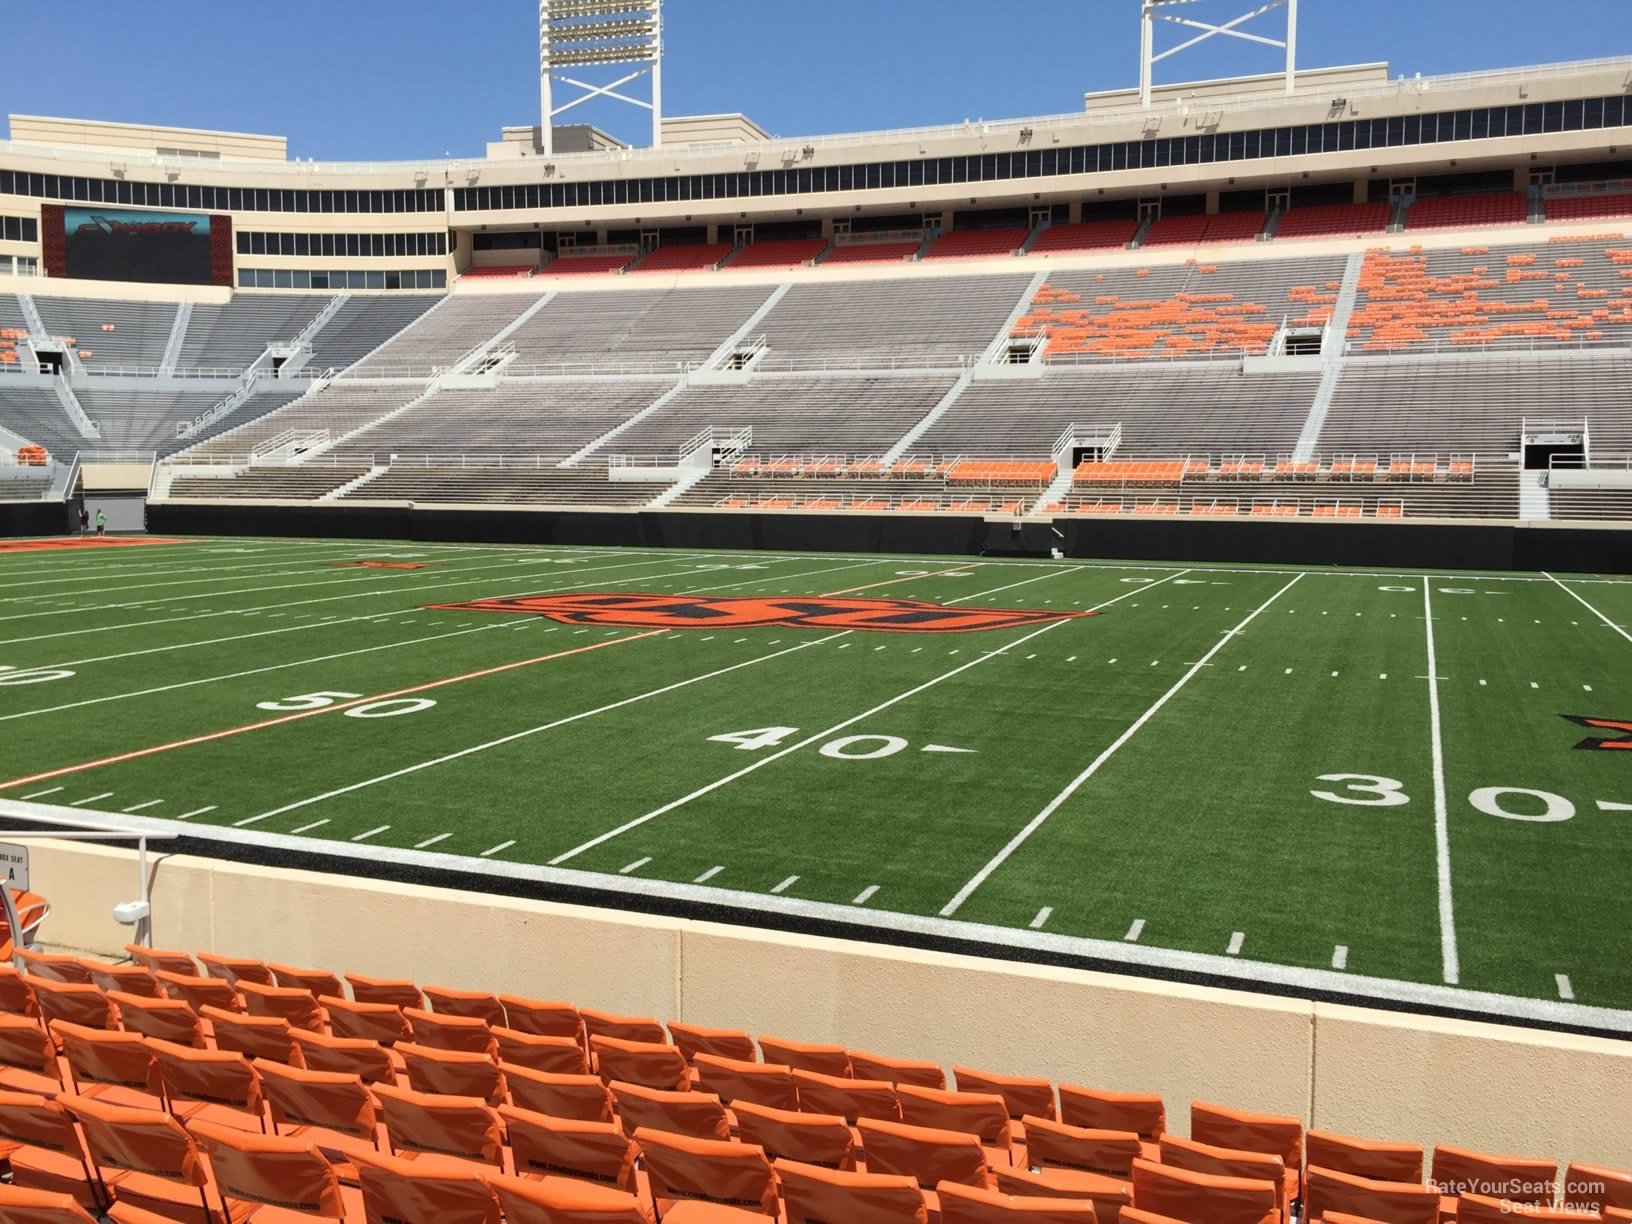 section 103, row 10 seat view  - boone pickens stadium